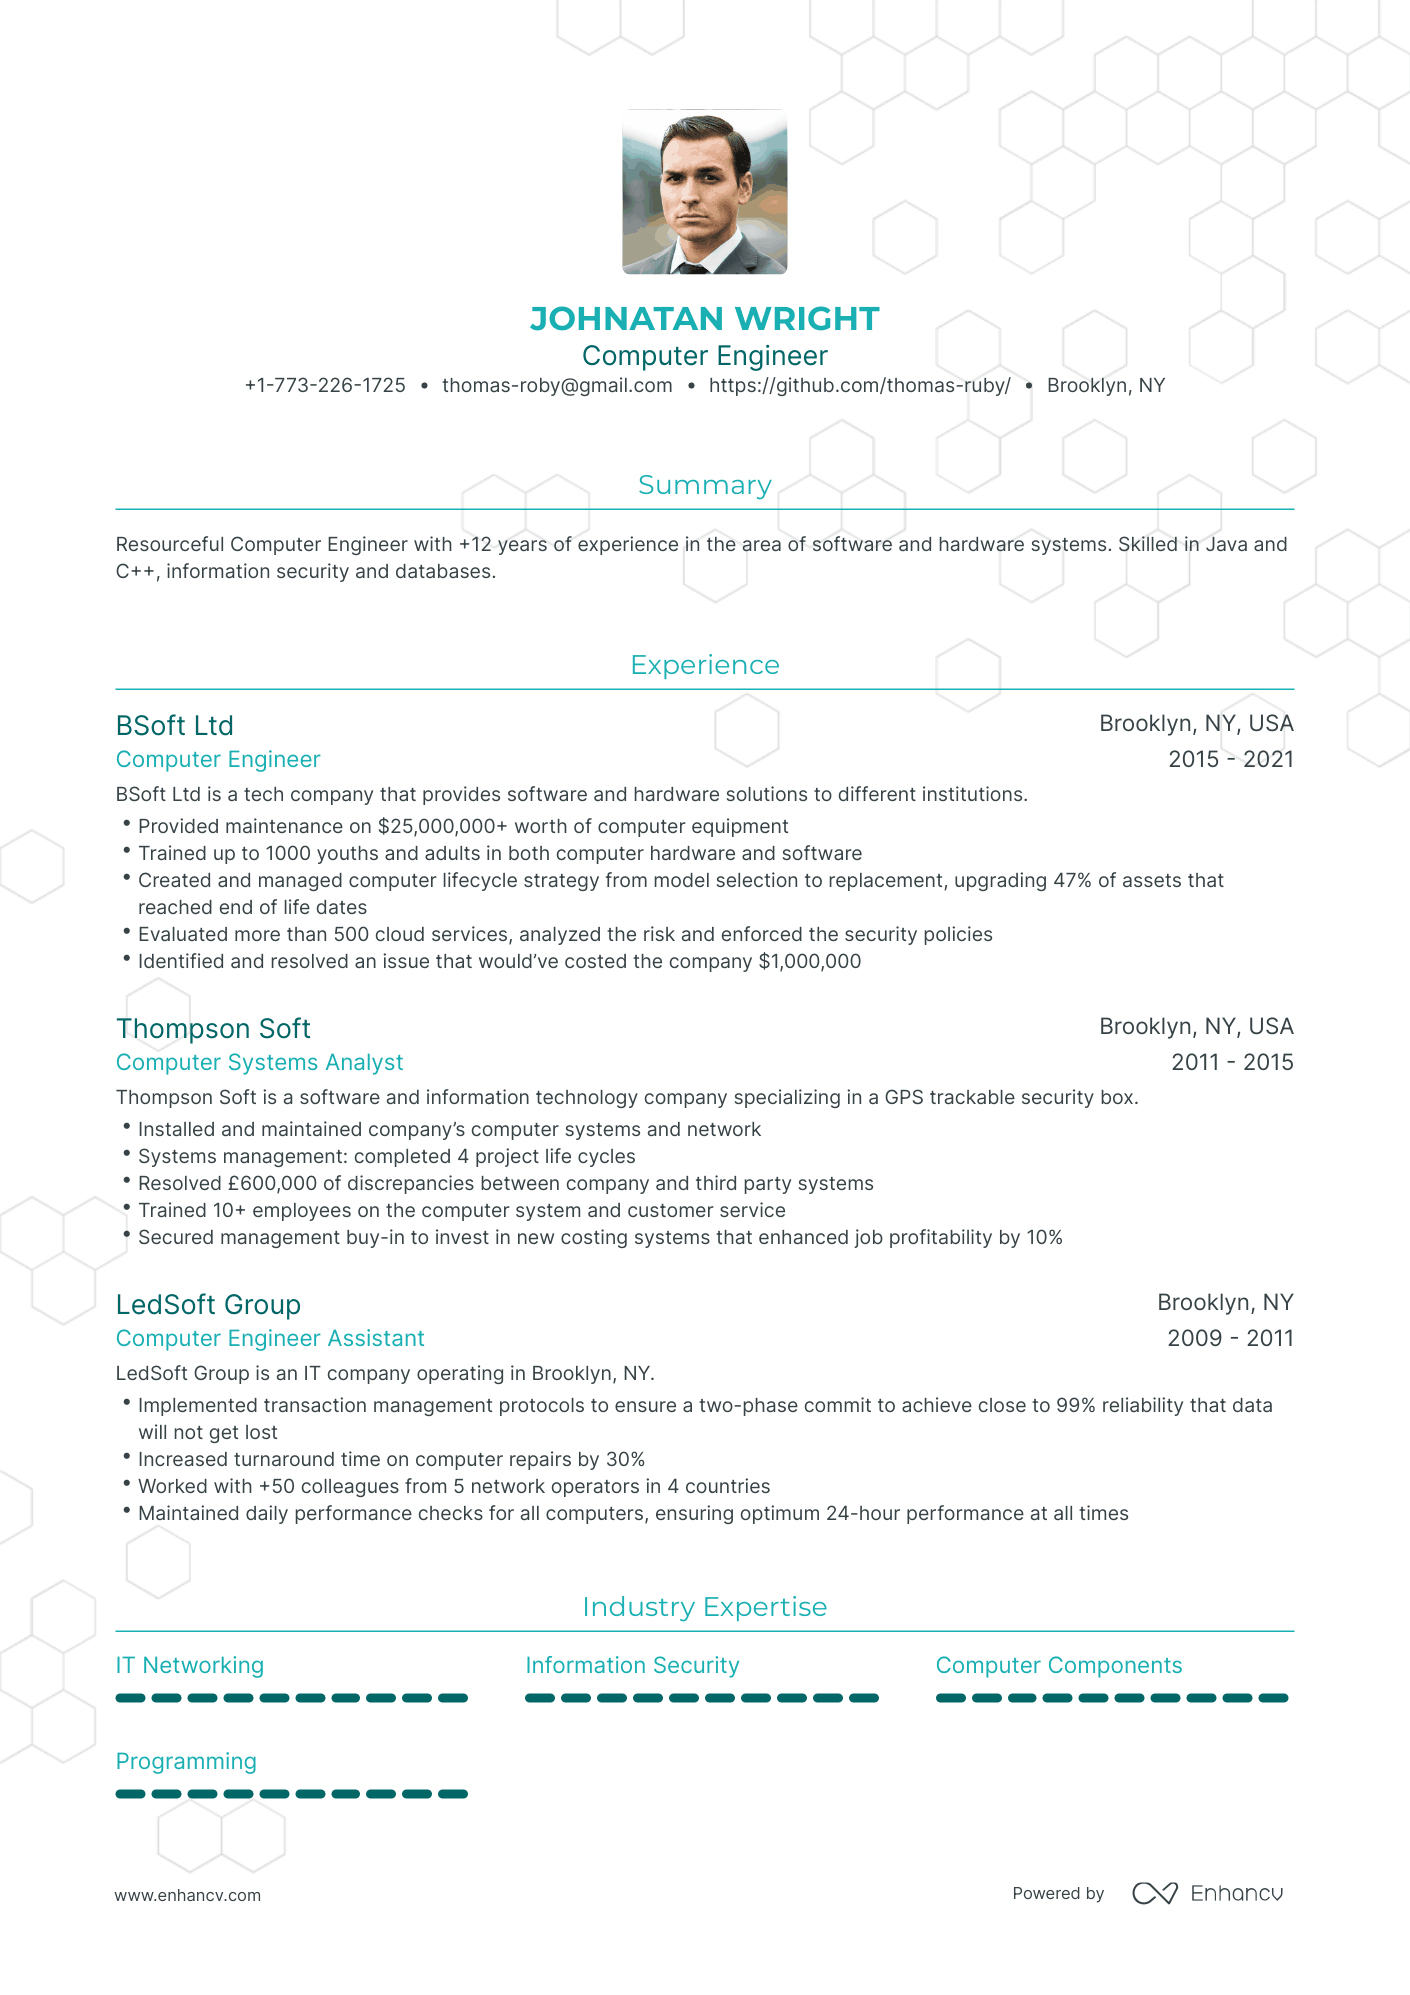 Traditional Computer Engineer Resume Template